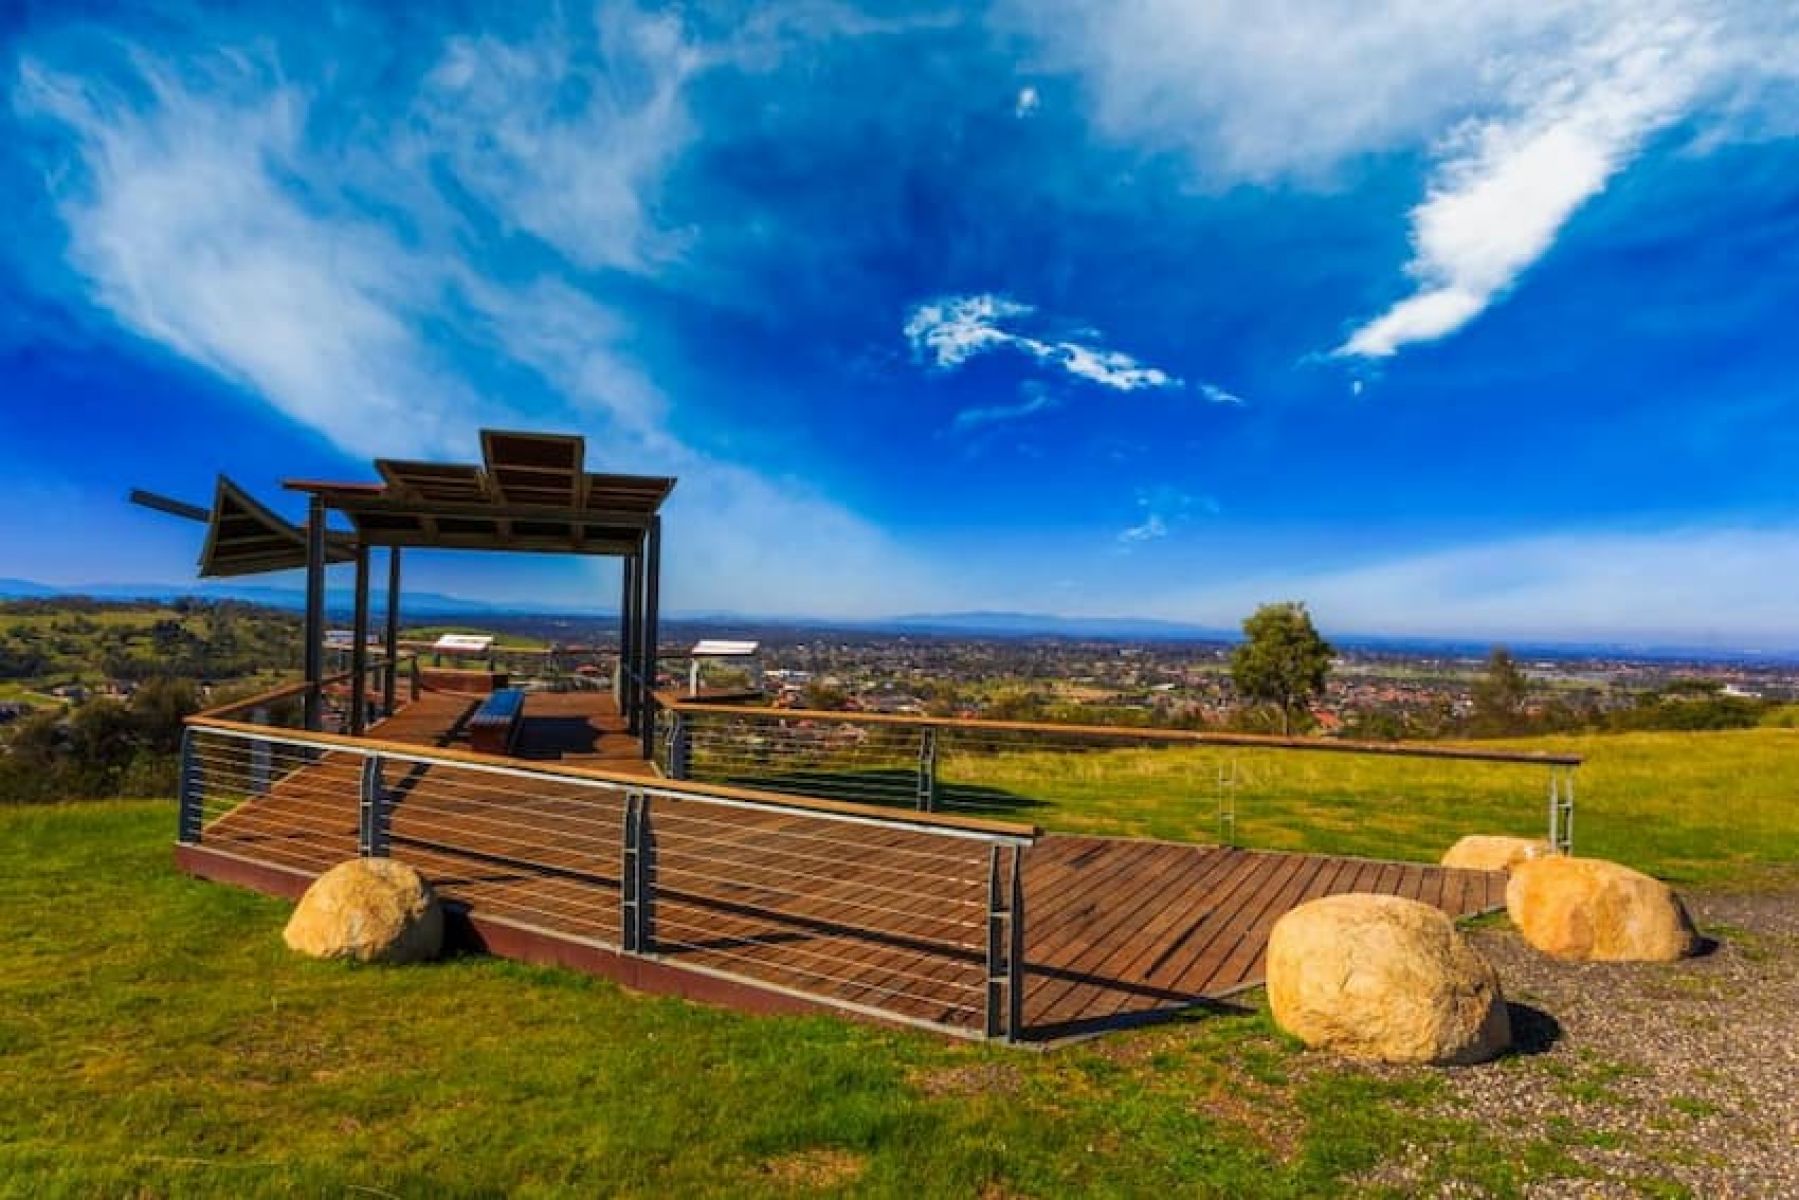 A wooden lookout platform and shelter with metal railings, overlooking the north-eastern suburbs of Melbourne with blue skies and light clouds. There are boulders at the walkway onto the platform